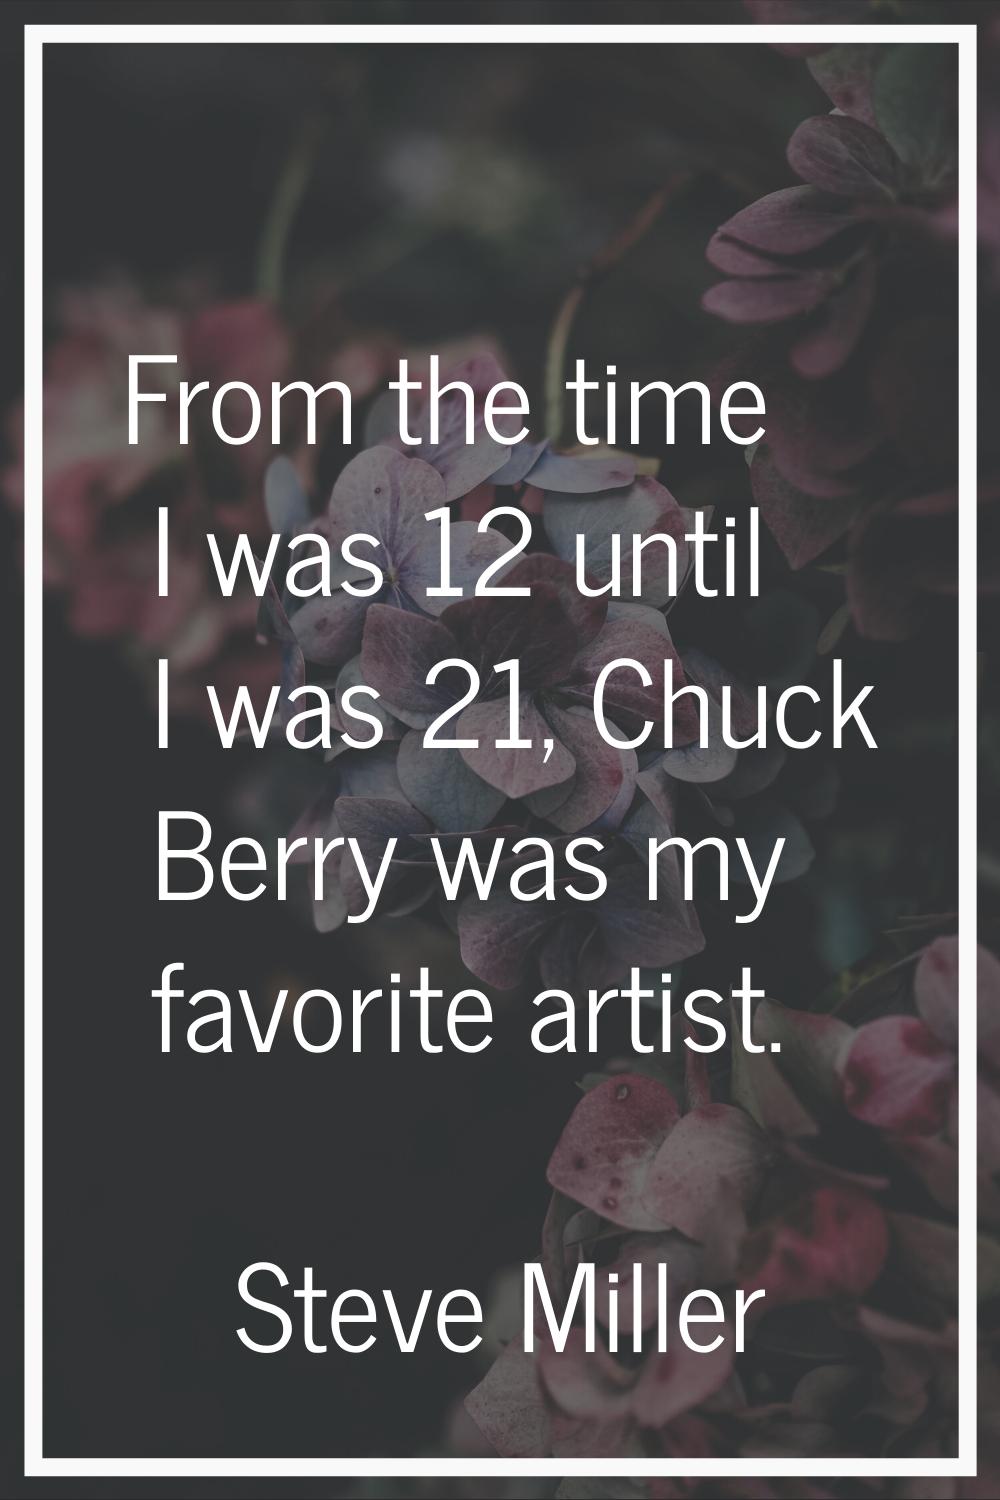 From the time I was 12 until I was 21, Chuck Berry was my favorite artist.